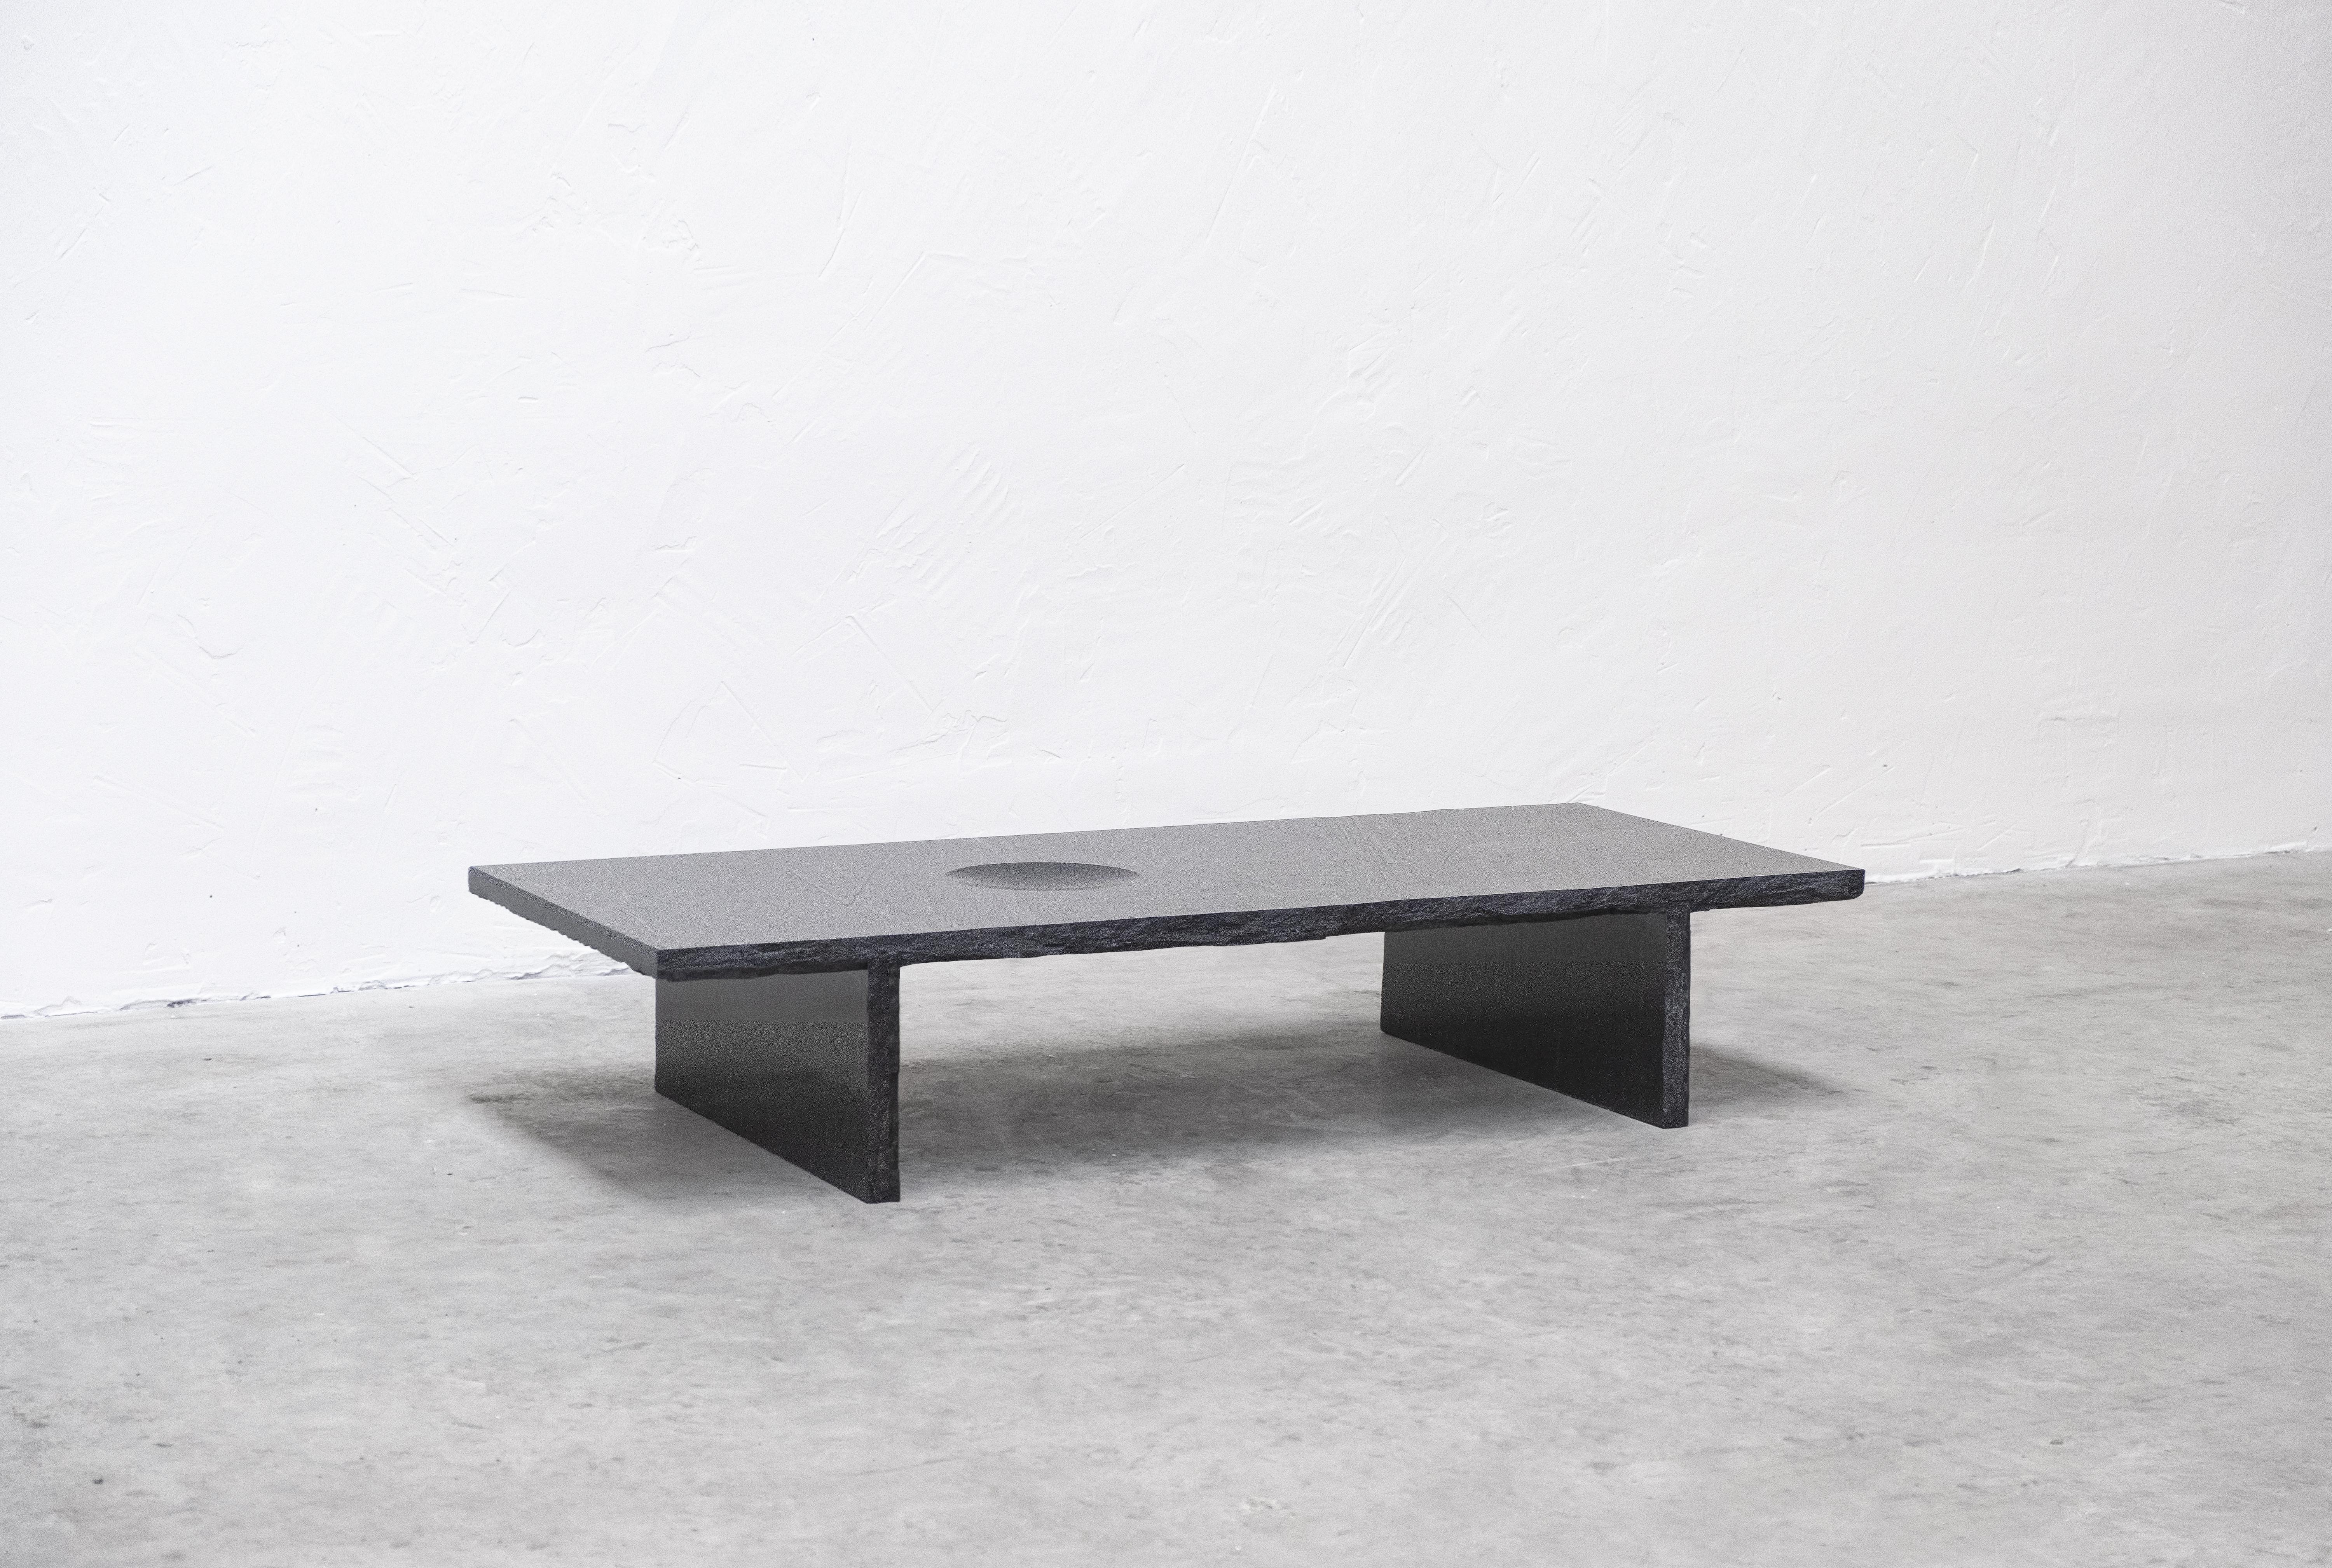 Black slate sculpted low table by Frederic Saulou
Frustre II
Black slate 
Measures: L 160 x W 70 x H 30 cm, approximately 150 kg
Limited edition of 12
Signed and numbered.

